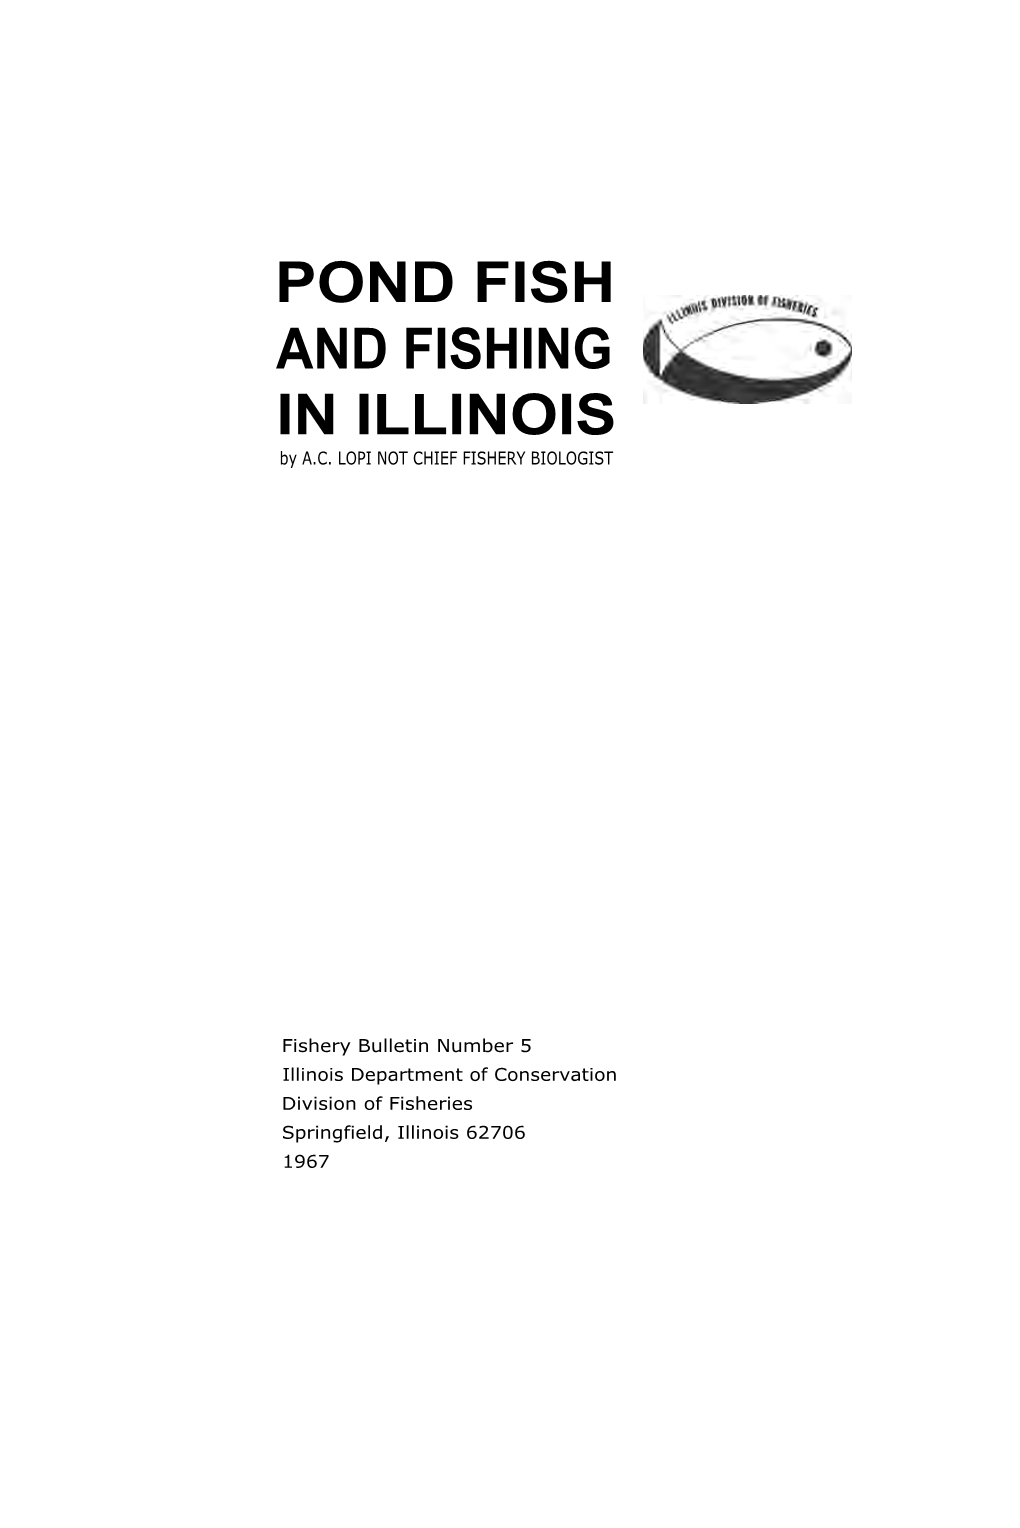 POND FISH and FISHING in ILLINOIS by A.C